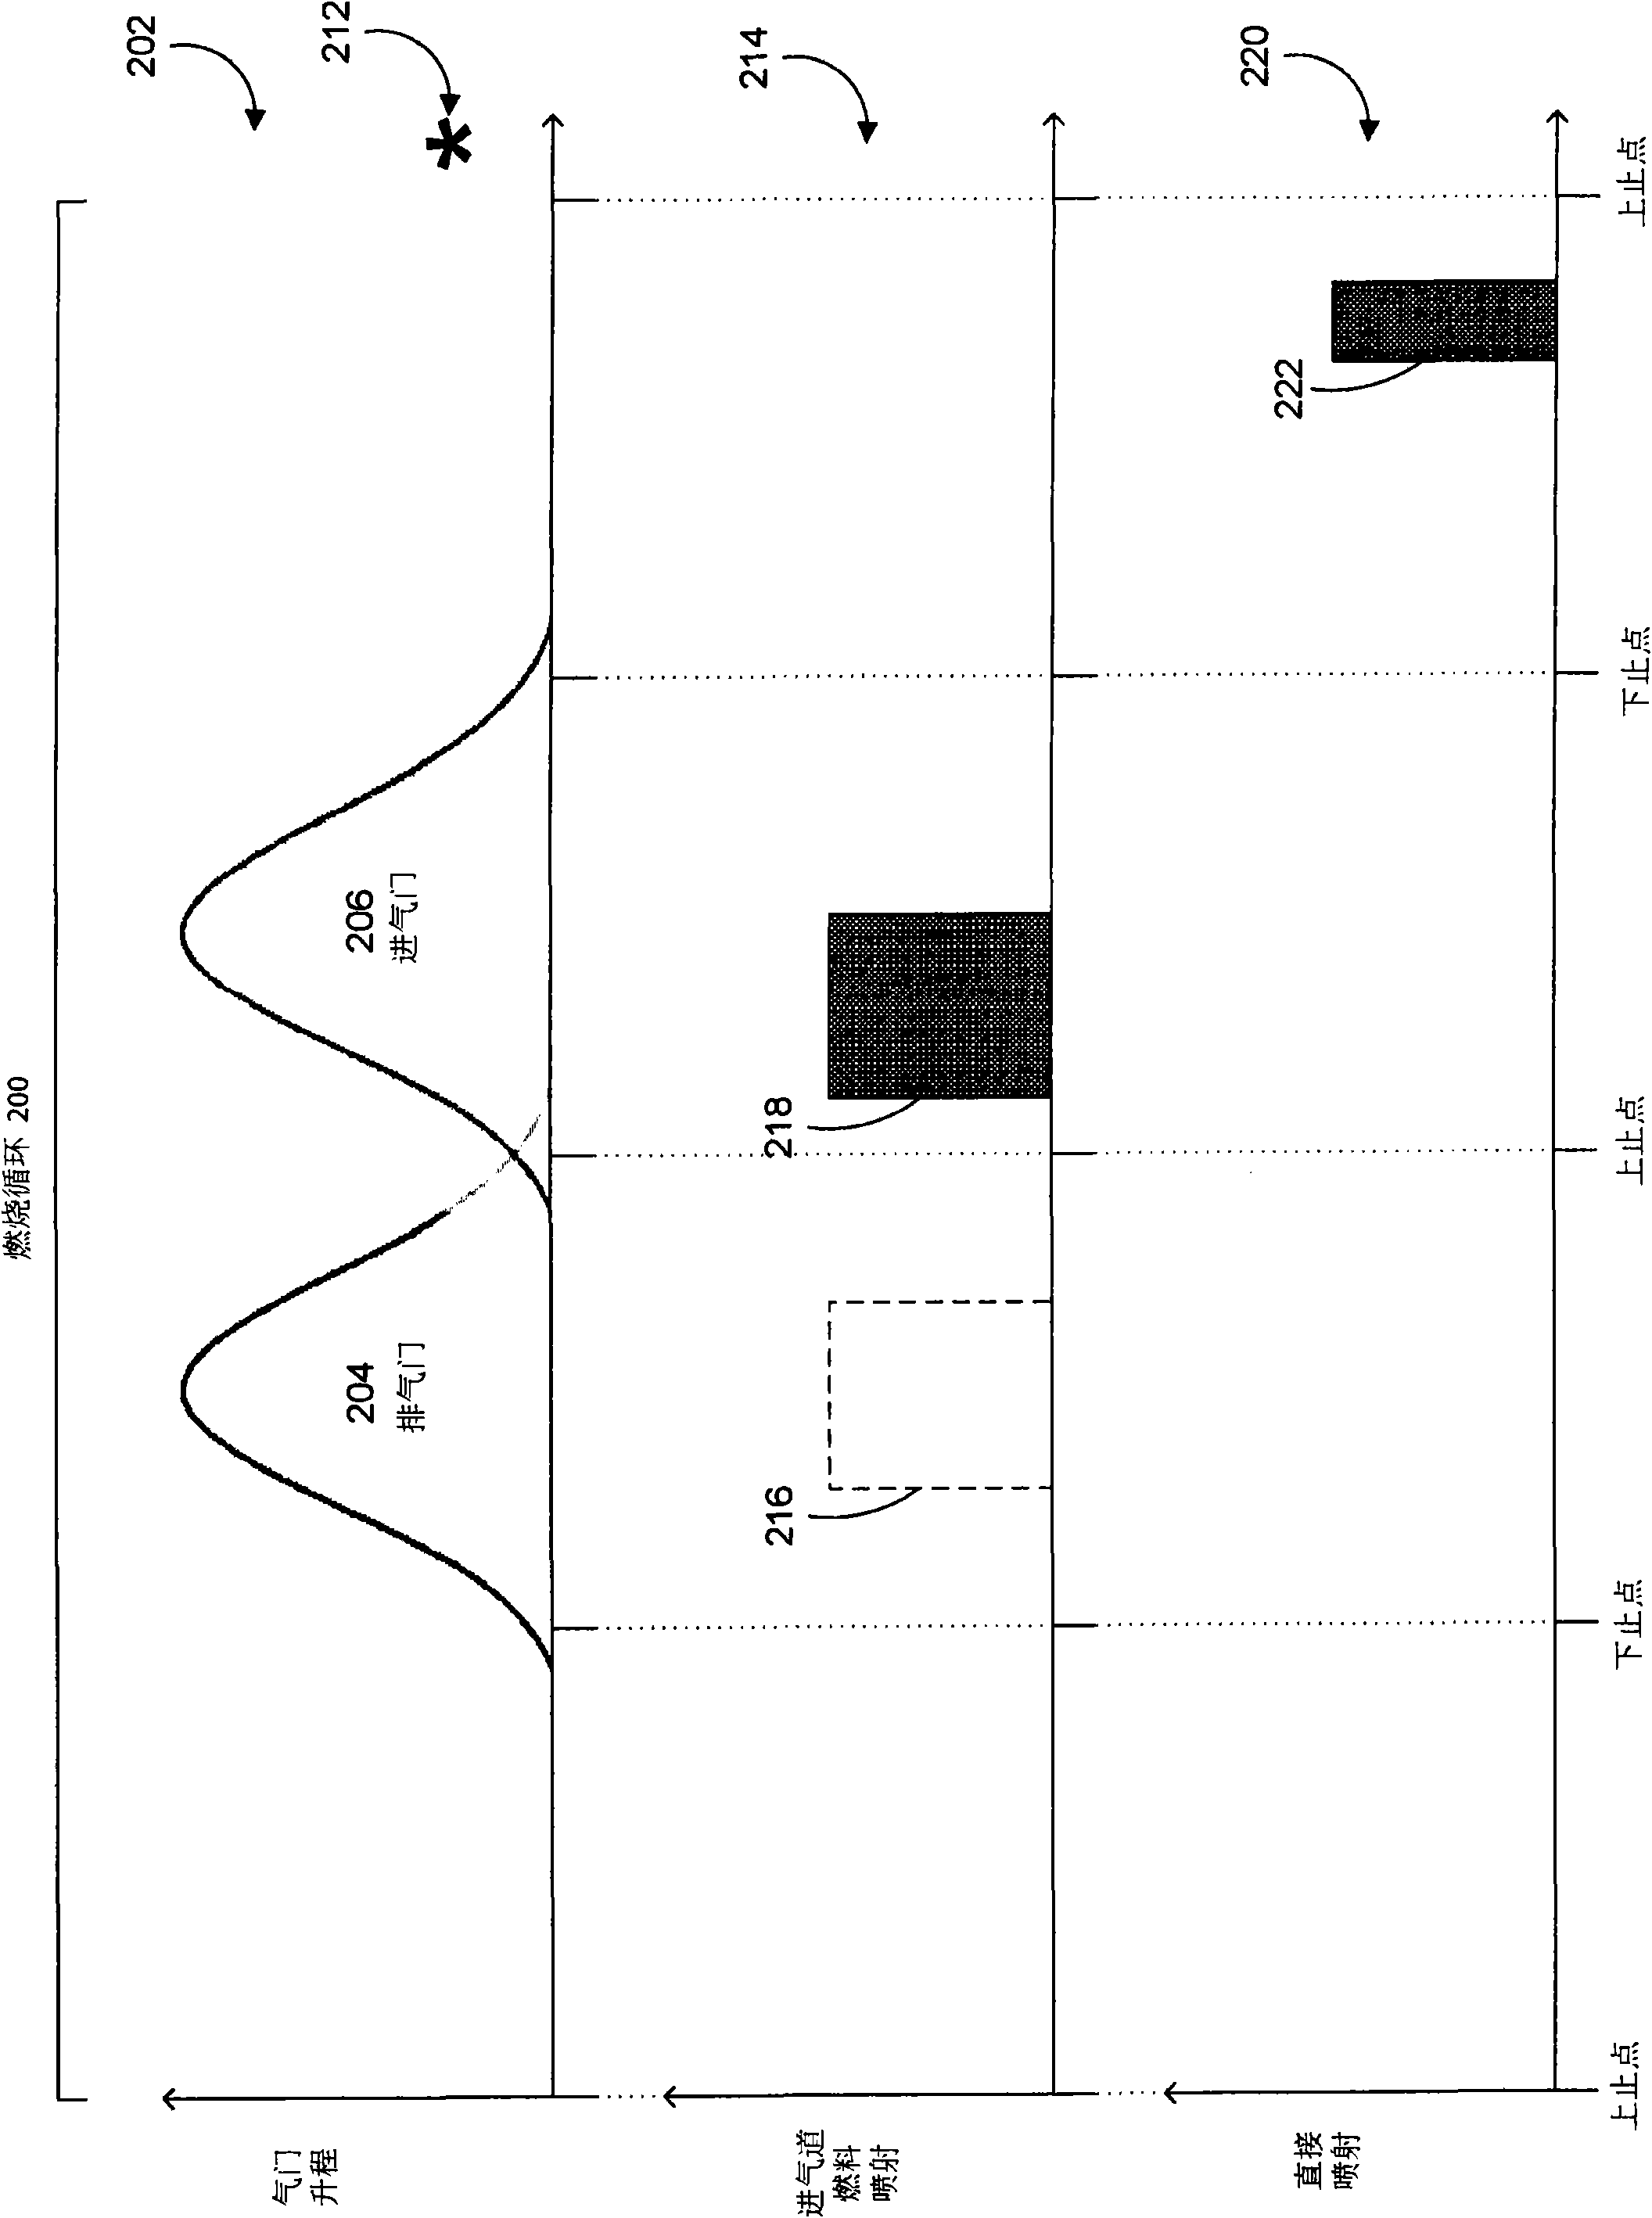 Engine starting control system and method